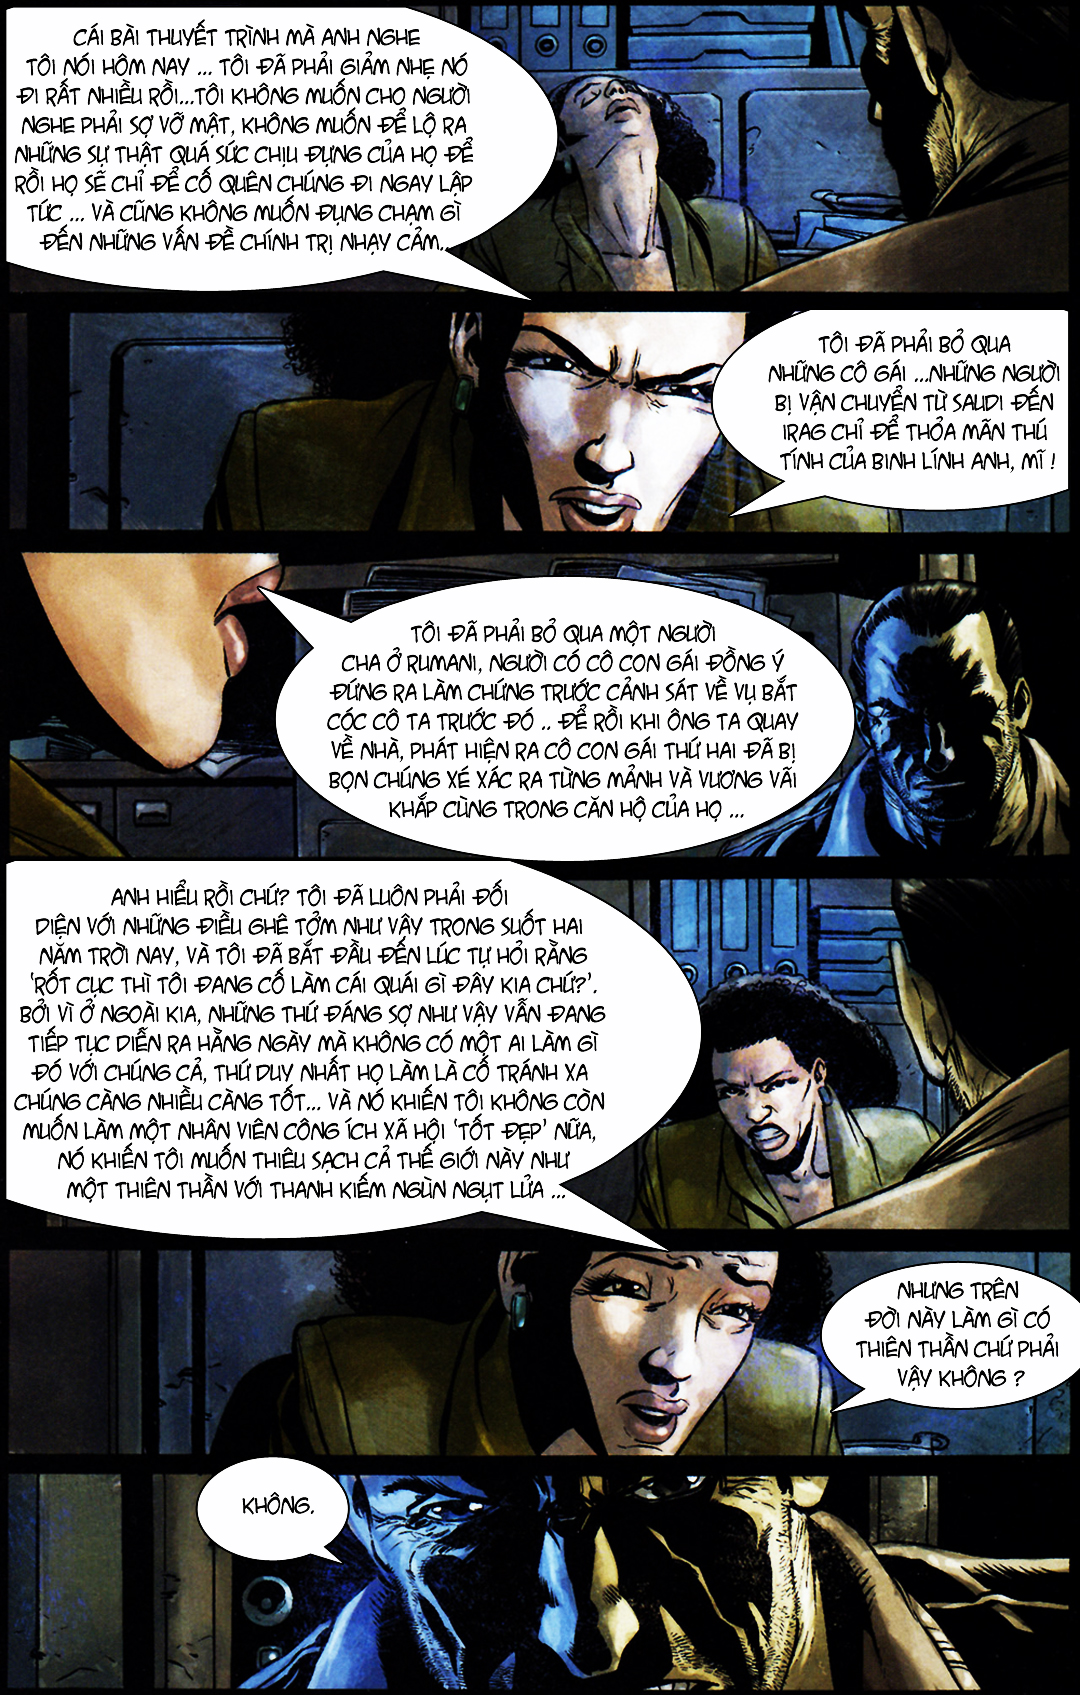 The Punisher: The Slavers chap 3 trang 19